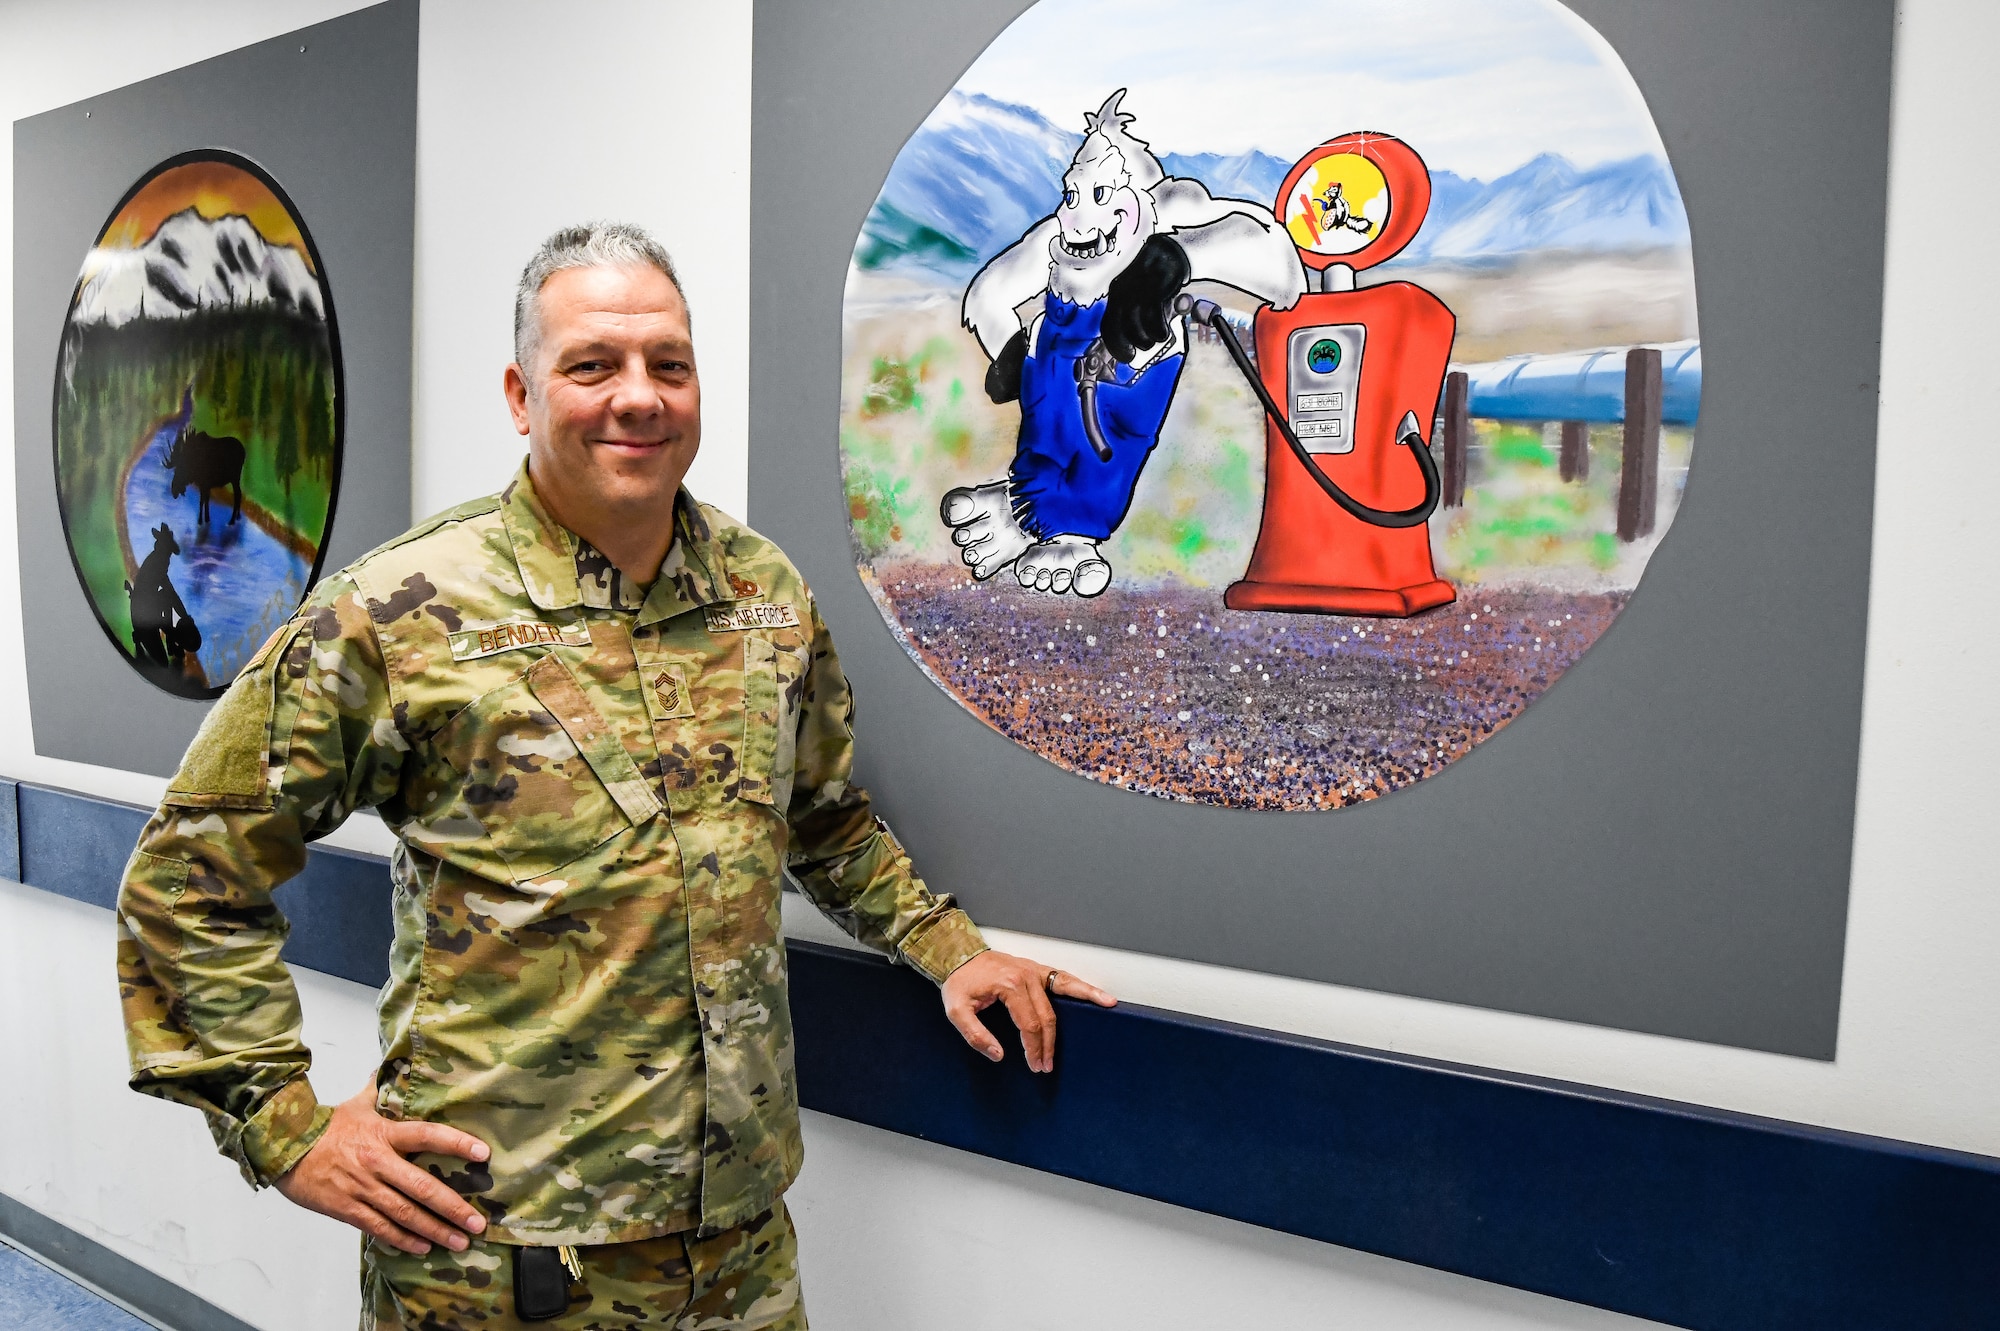 U.S. Air Force Chief Master Sgt. George Bender of the 168th Wing, 168th Maintenance Group, stands in front of the 168th Wing KC-135 nose art he has drawn for the Wing’s dedicated crew chief’s aircraft and is on display in the halls of the MXG at Eielson Air Force Base.